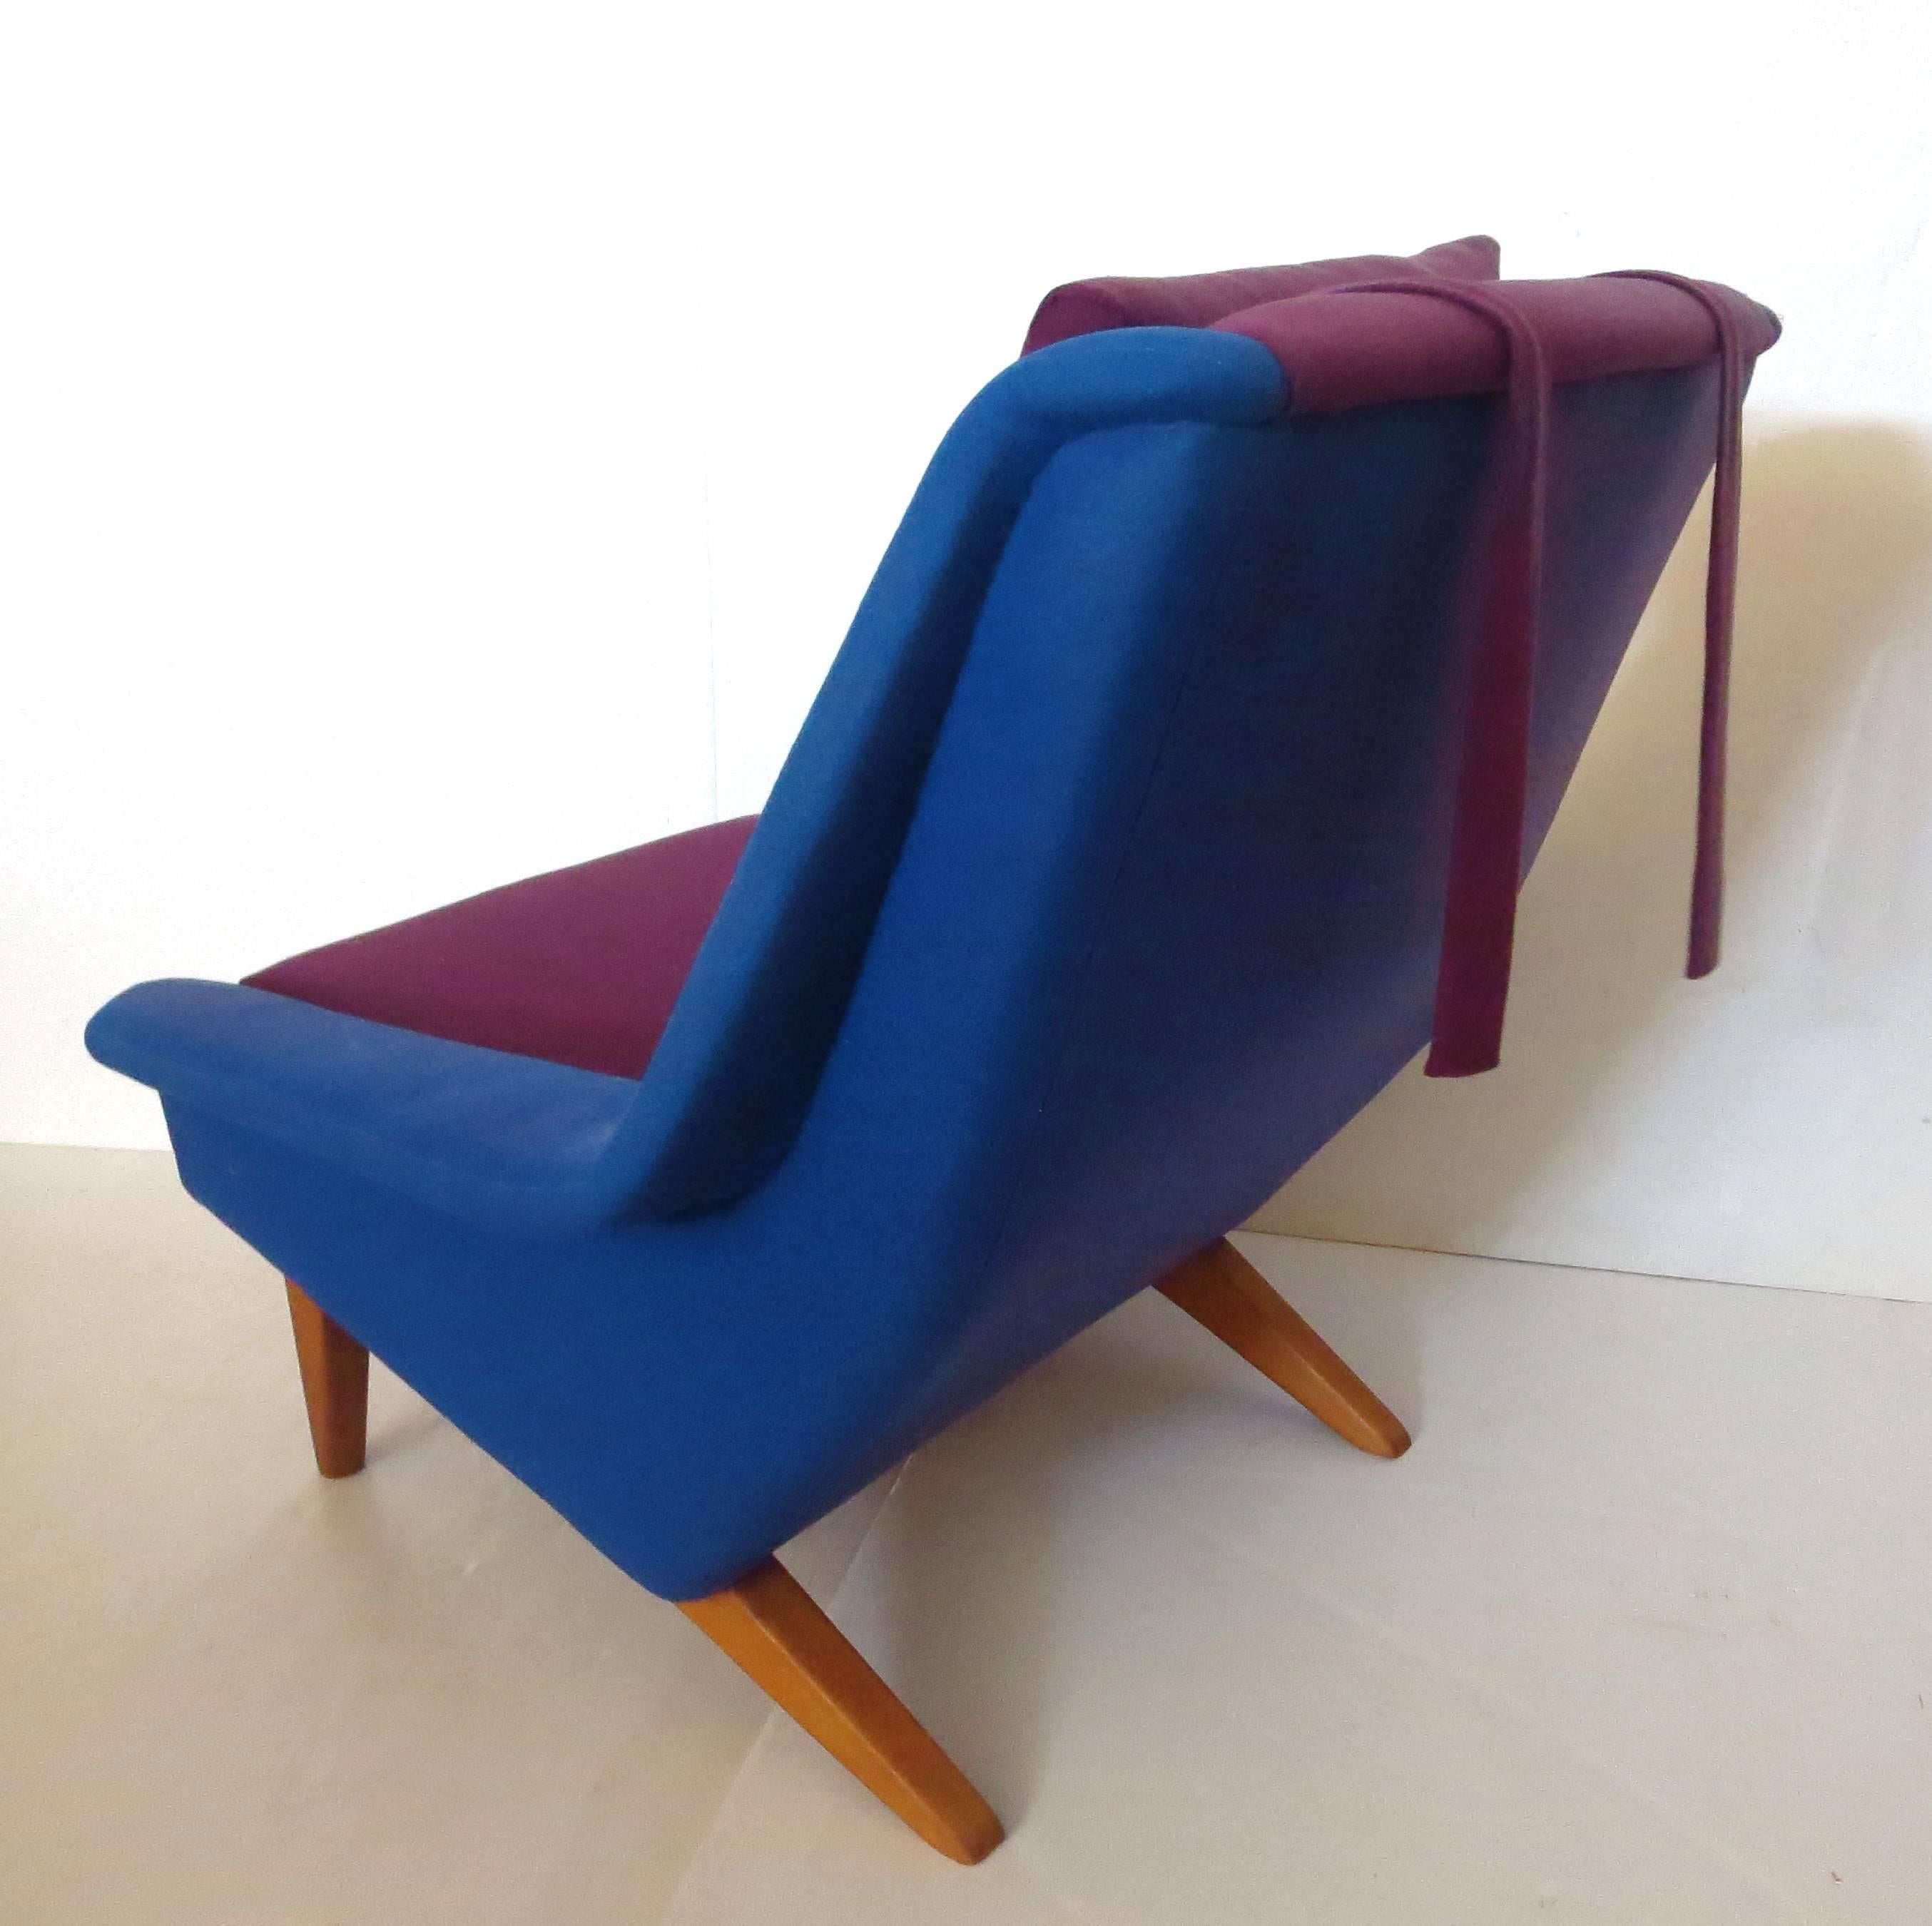 Striking rare bicolor upholstered armchair, comes with its original two tone fabric and headrest , solid construction from a non smoker home, no tears or smells, this unique chair has the flair of the era, nice lines and construction designed by